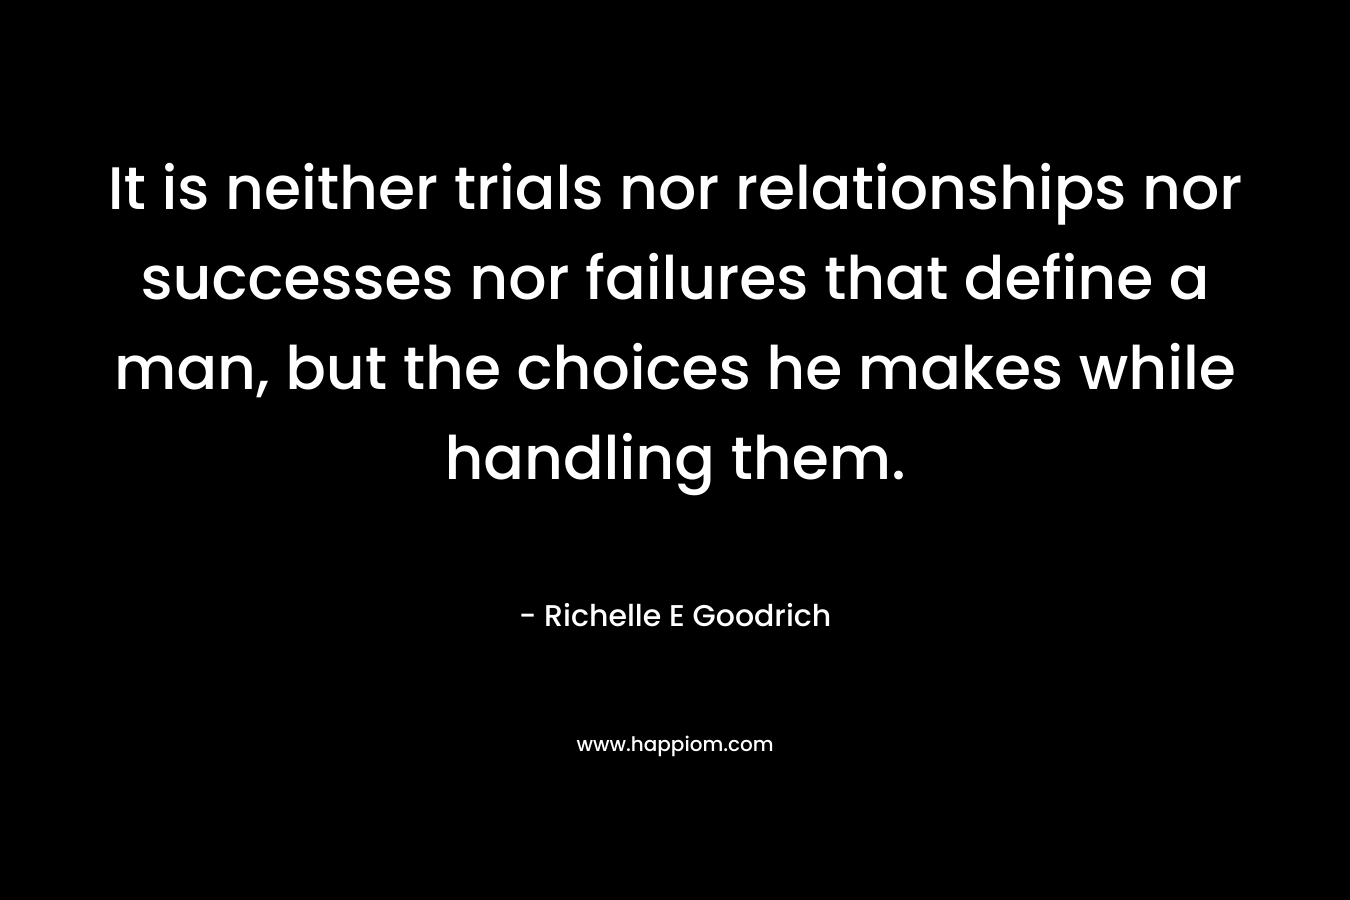 It is neither trials nor relationships nor successes nor failures that define a man, but the choices he makes while handling them. – Richelle E Goodrich